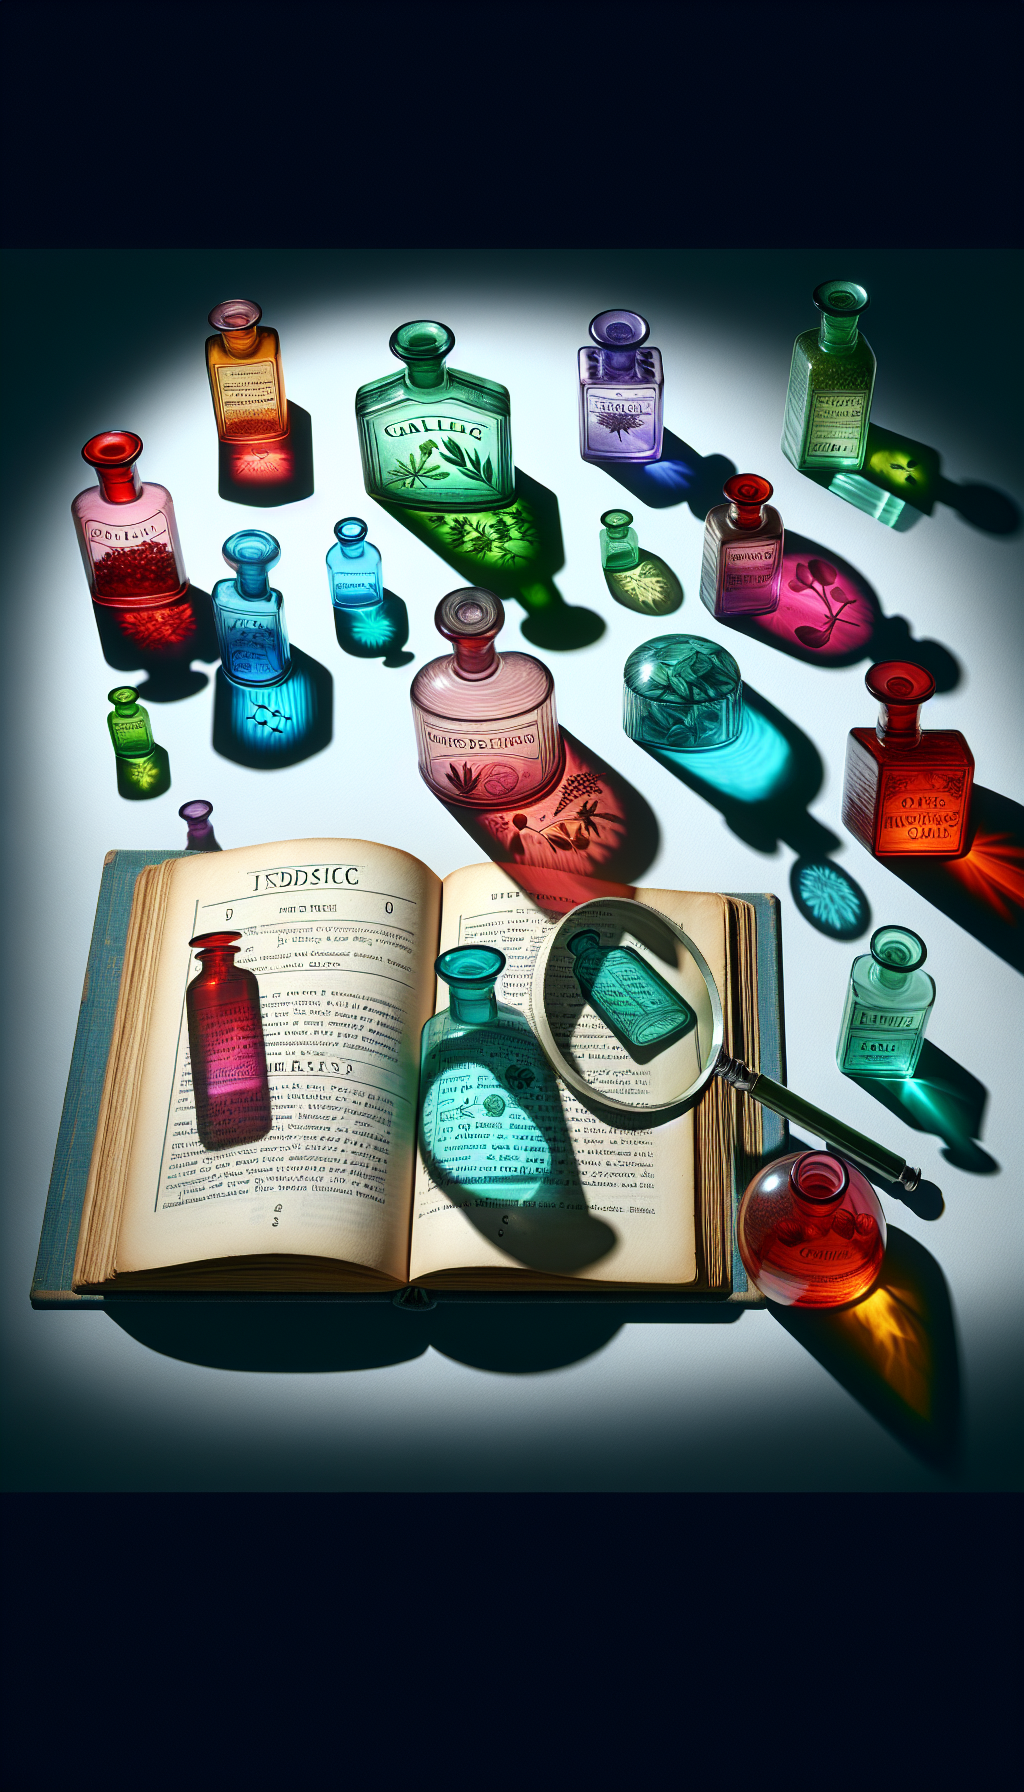 An array of translucent antique medicine bottles casts colorful shadows on an open book’s pages, with each shadow revealing text about the bottle's contents. The hue aligns with the medicine's purpose: green for calming herbs, red for energy tonics. A magnifying glass hovers over, symbolizing identification, with styles ranging from realistic to abstract within each shadow transition, hinting at historical to contemporary understanding.